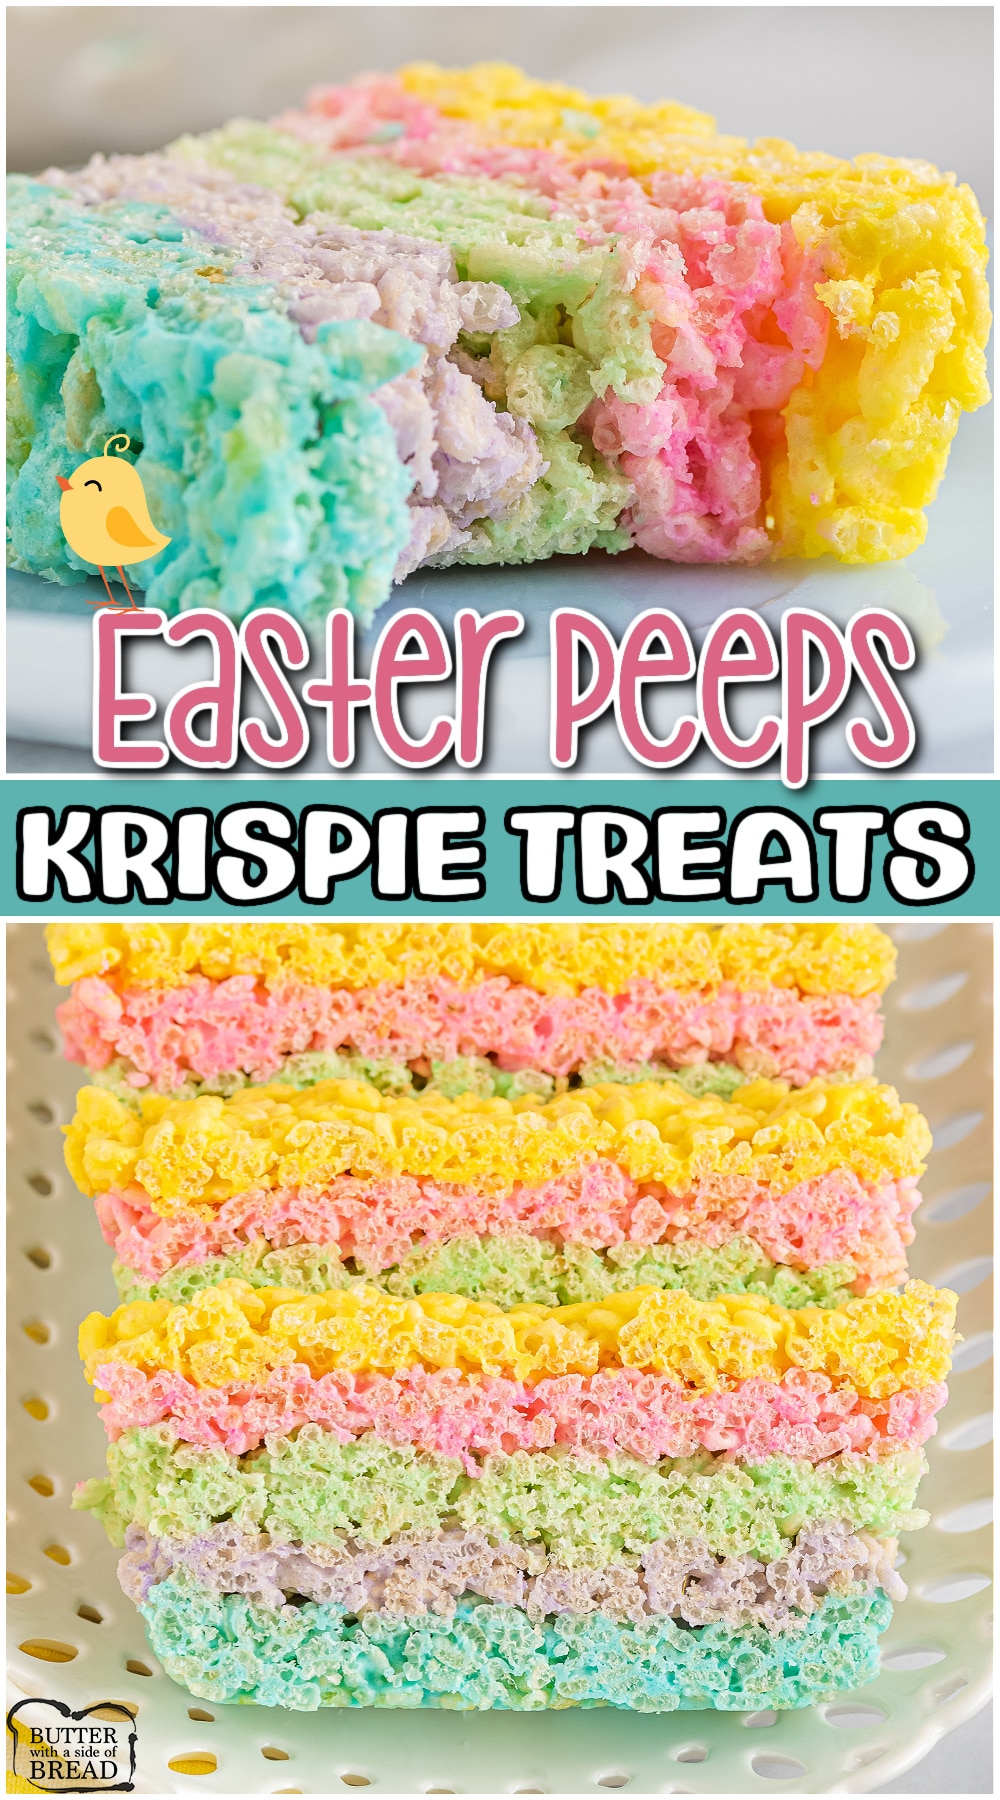 Easter Peeps Krispie Treats are a colorful & festive Easter dessert made with Peeps marshmallows! Classic rice krispie treats with a fun twist perfect for Easter. 